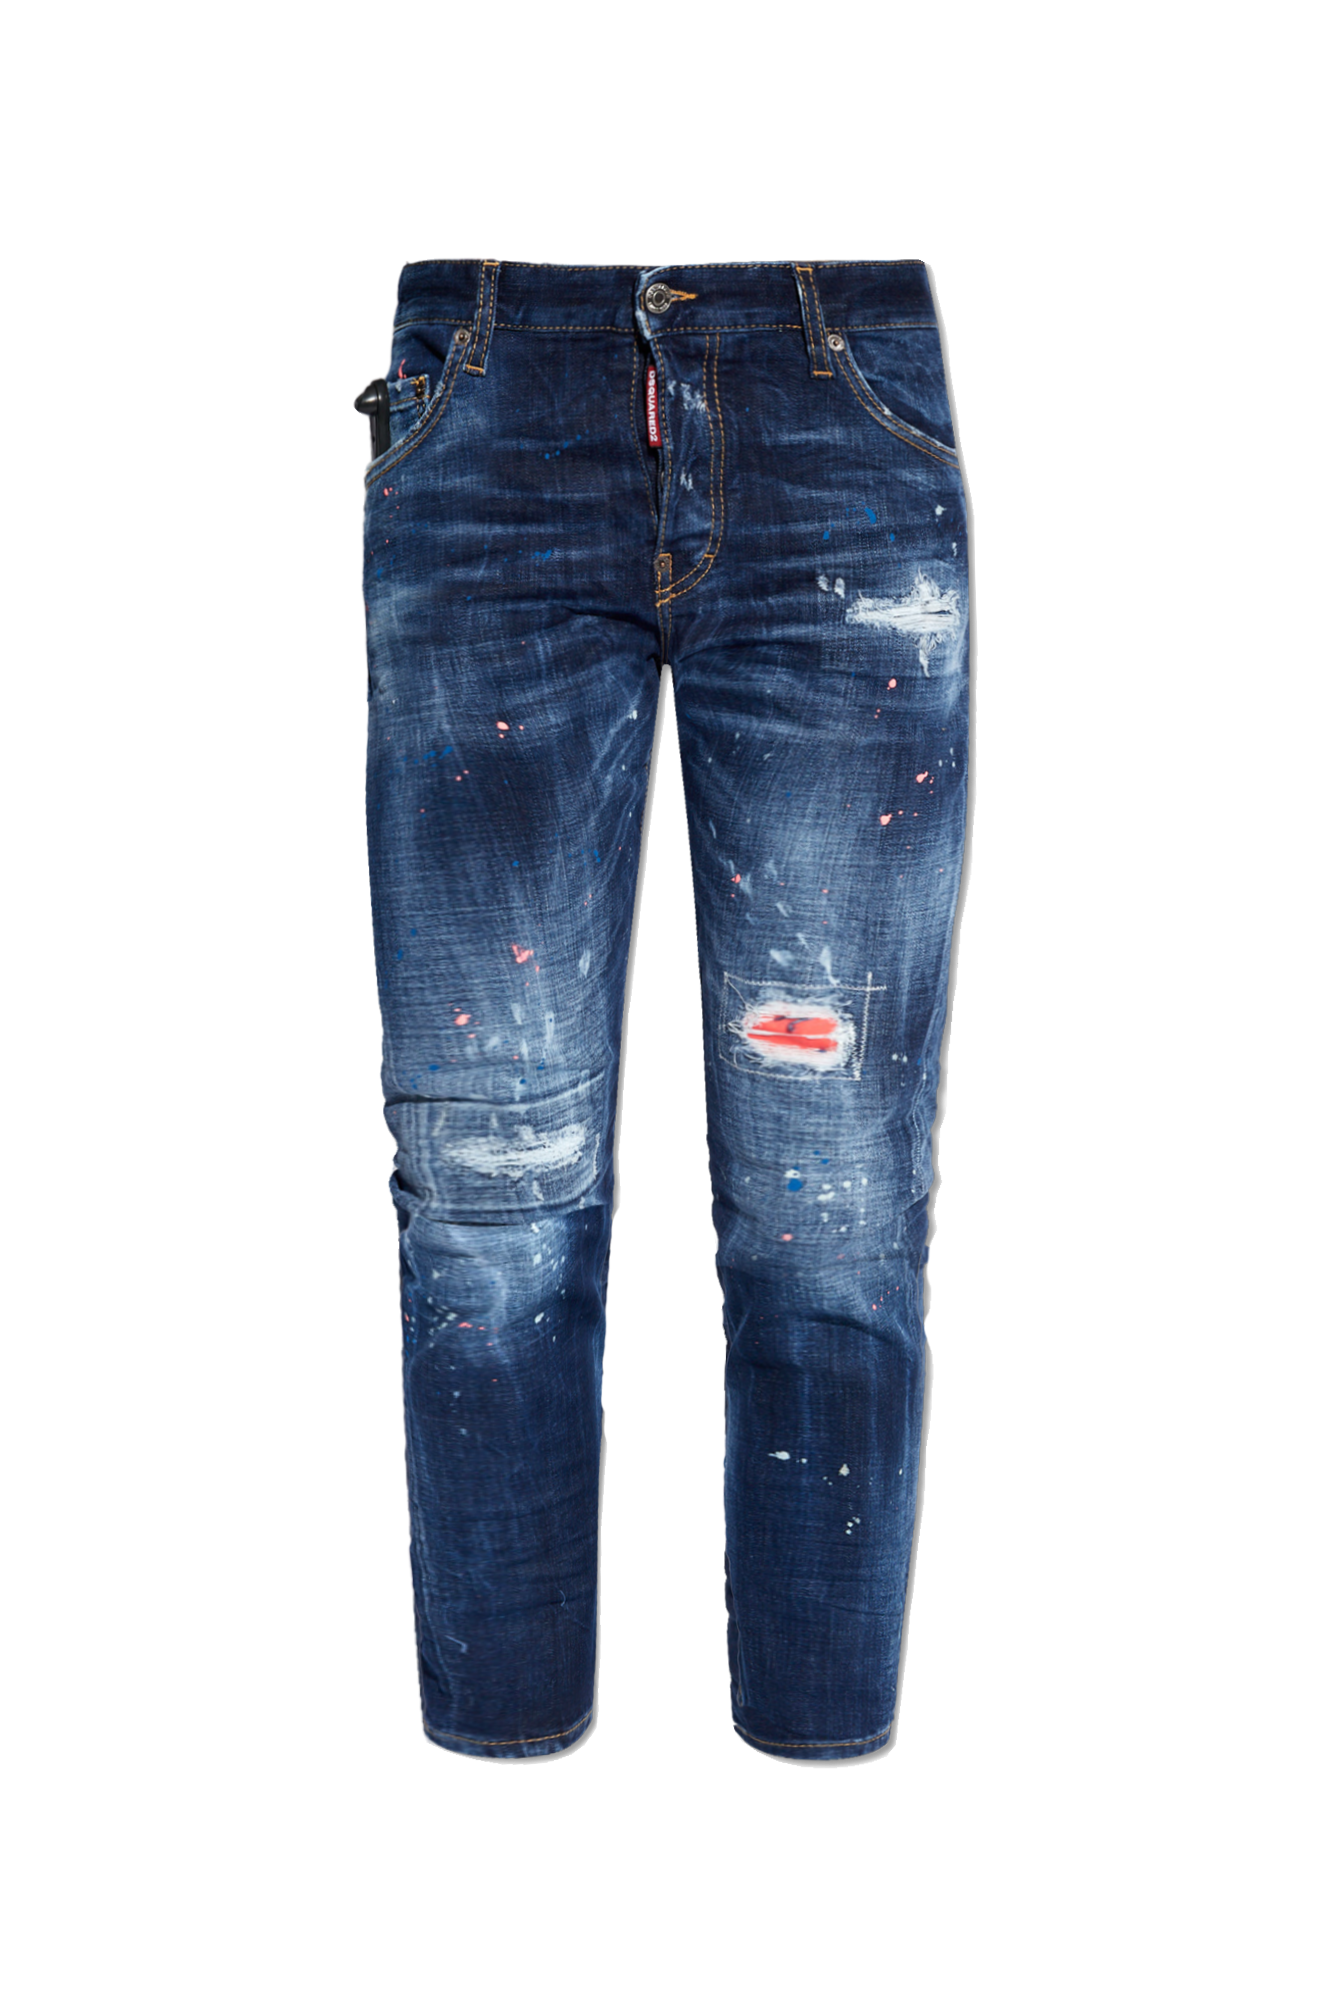 Blue 'Sexy Twist' jeans Dsquared2 - Brioni Tailored Pants